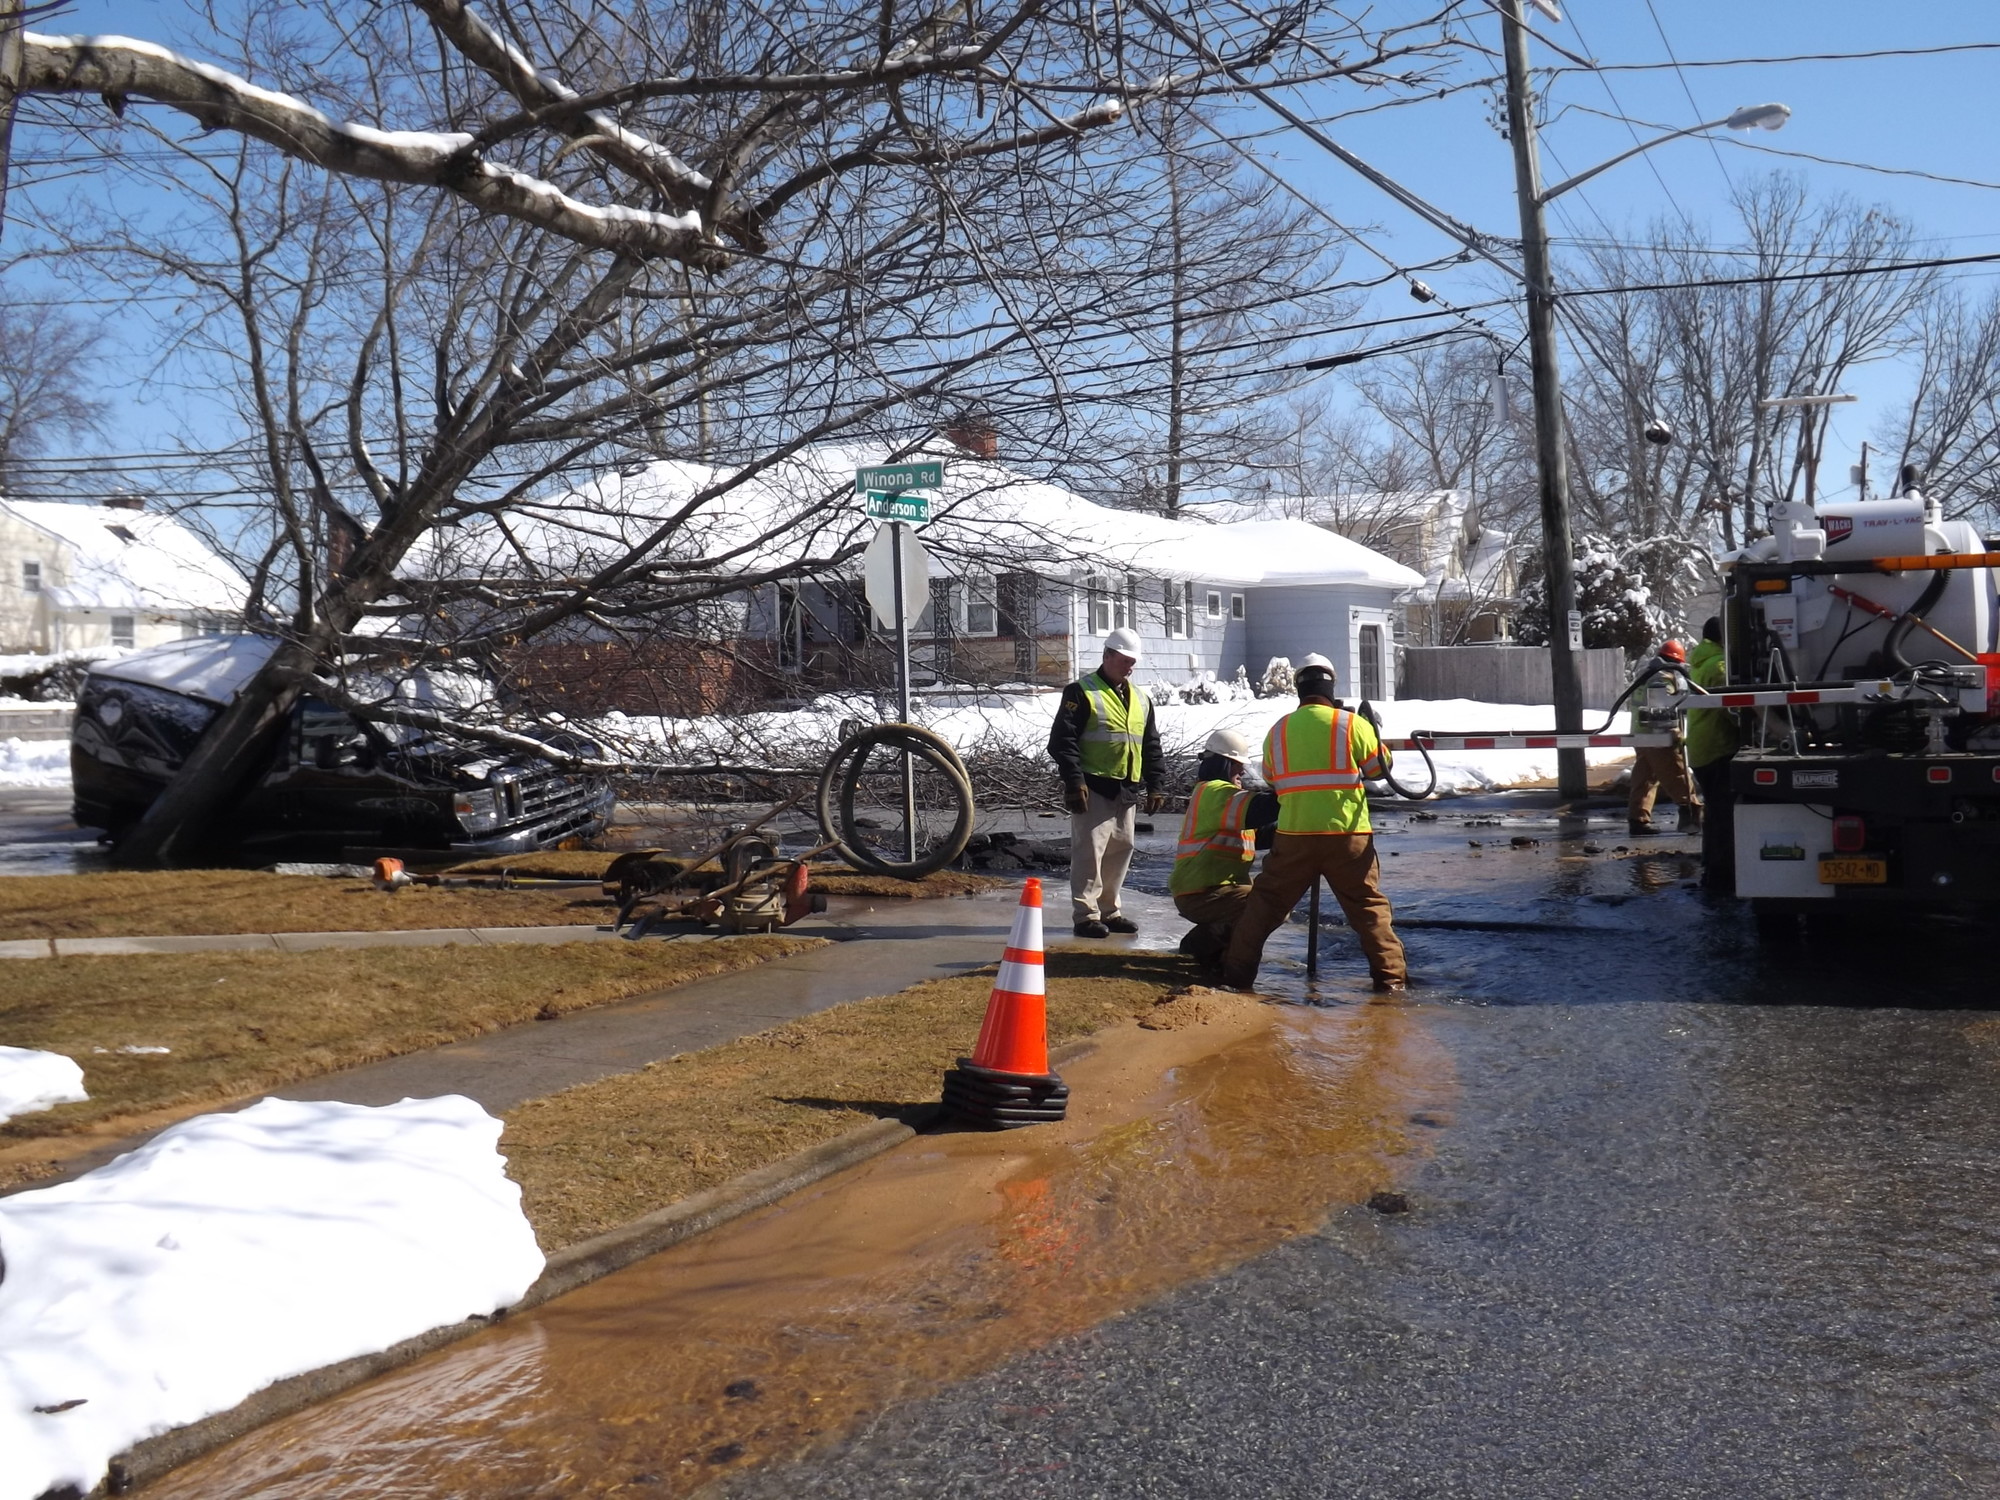 Crews worked to shut off valves to reduce the number of customers without water.